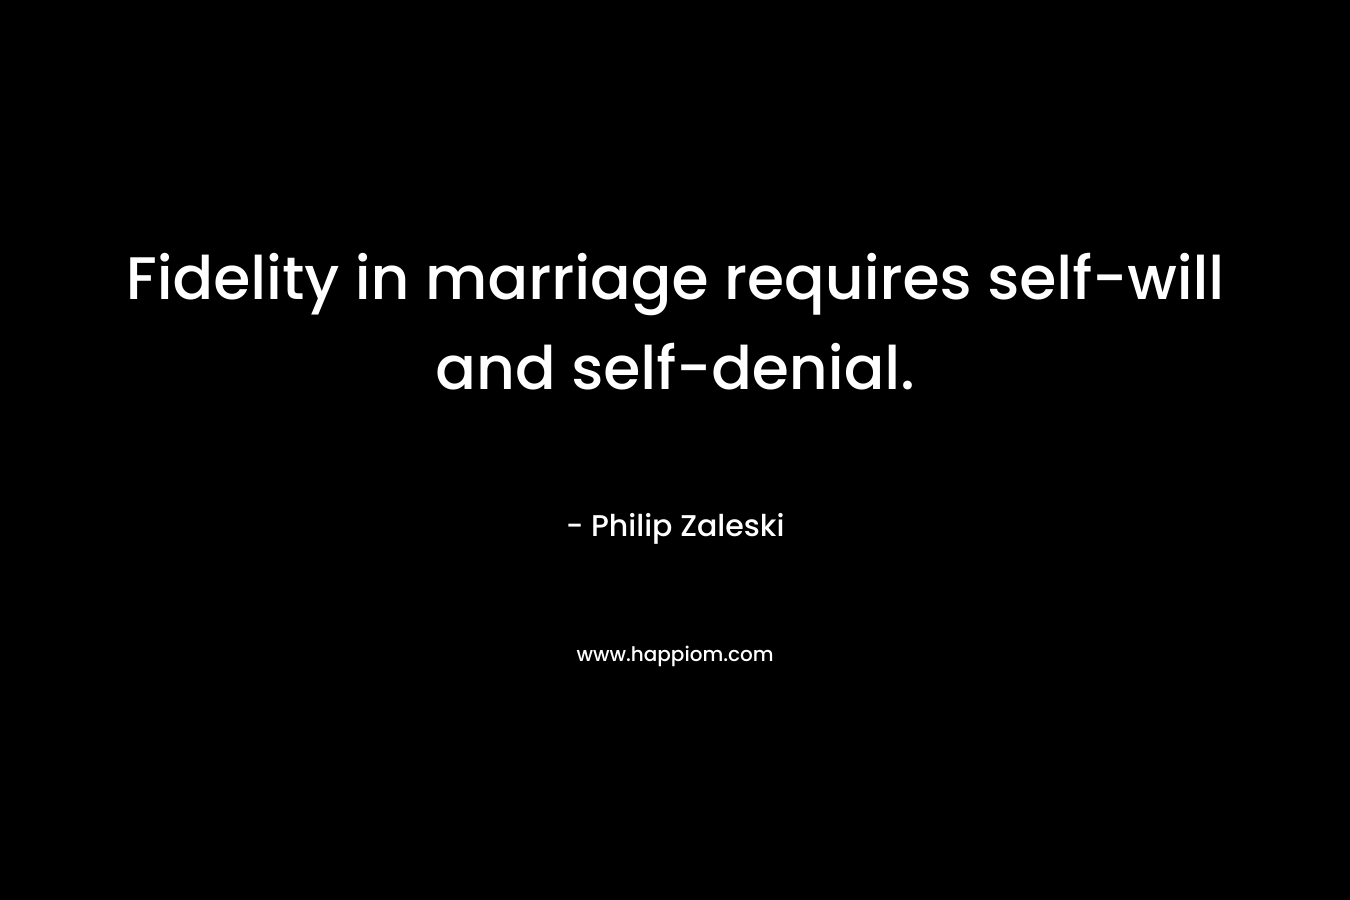 Fidelity in marriage requires self-will and self-denial.